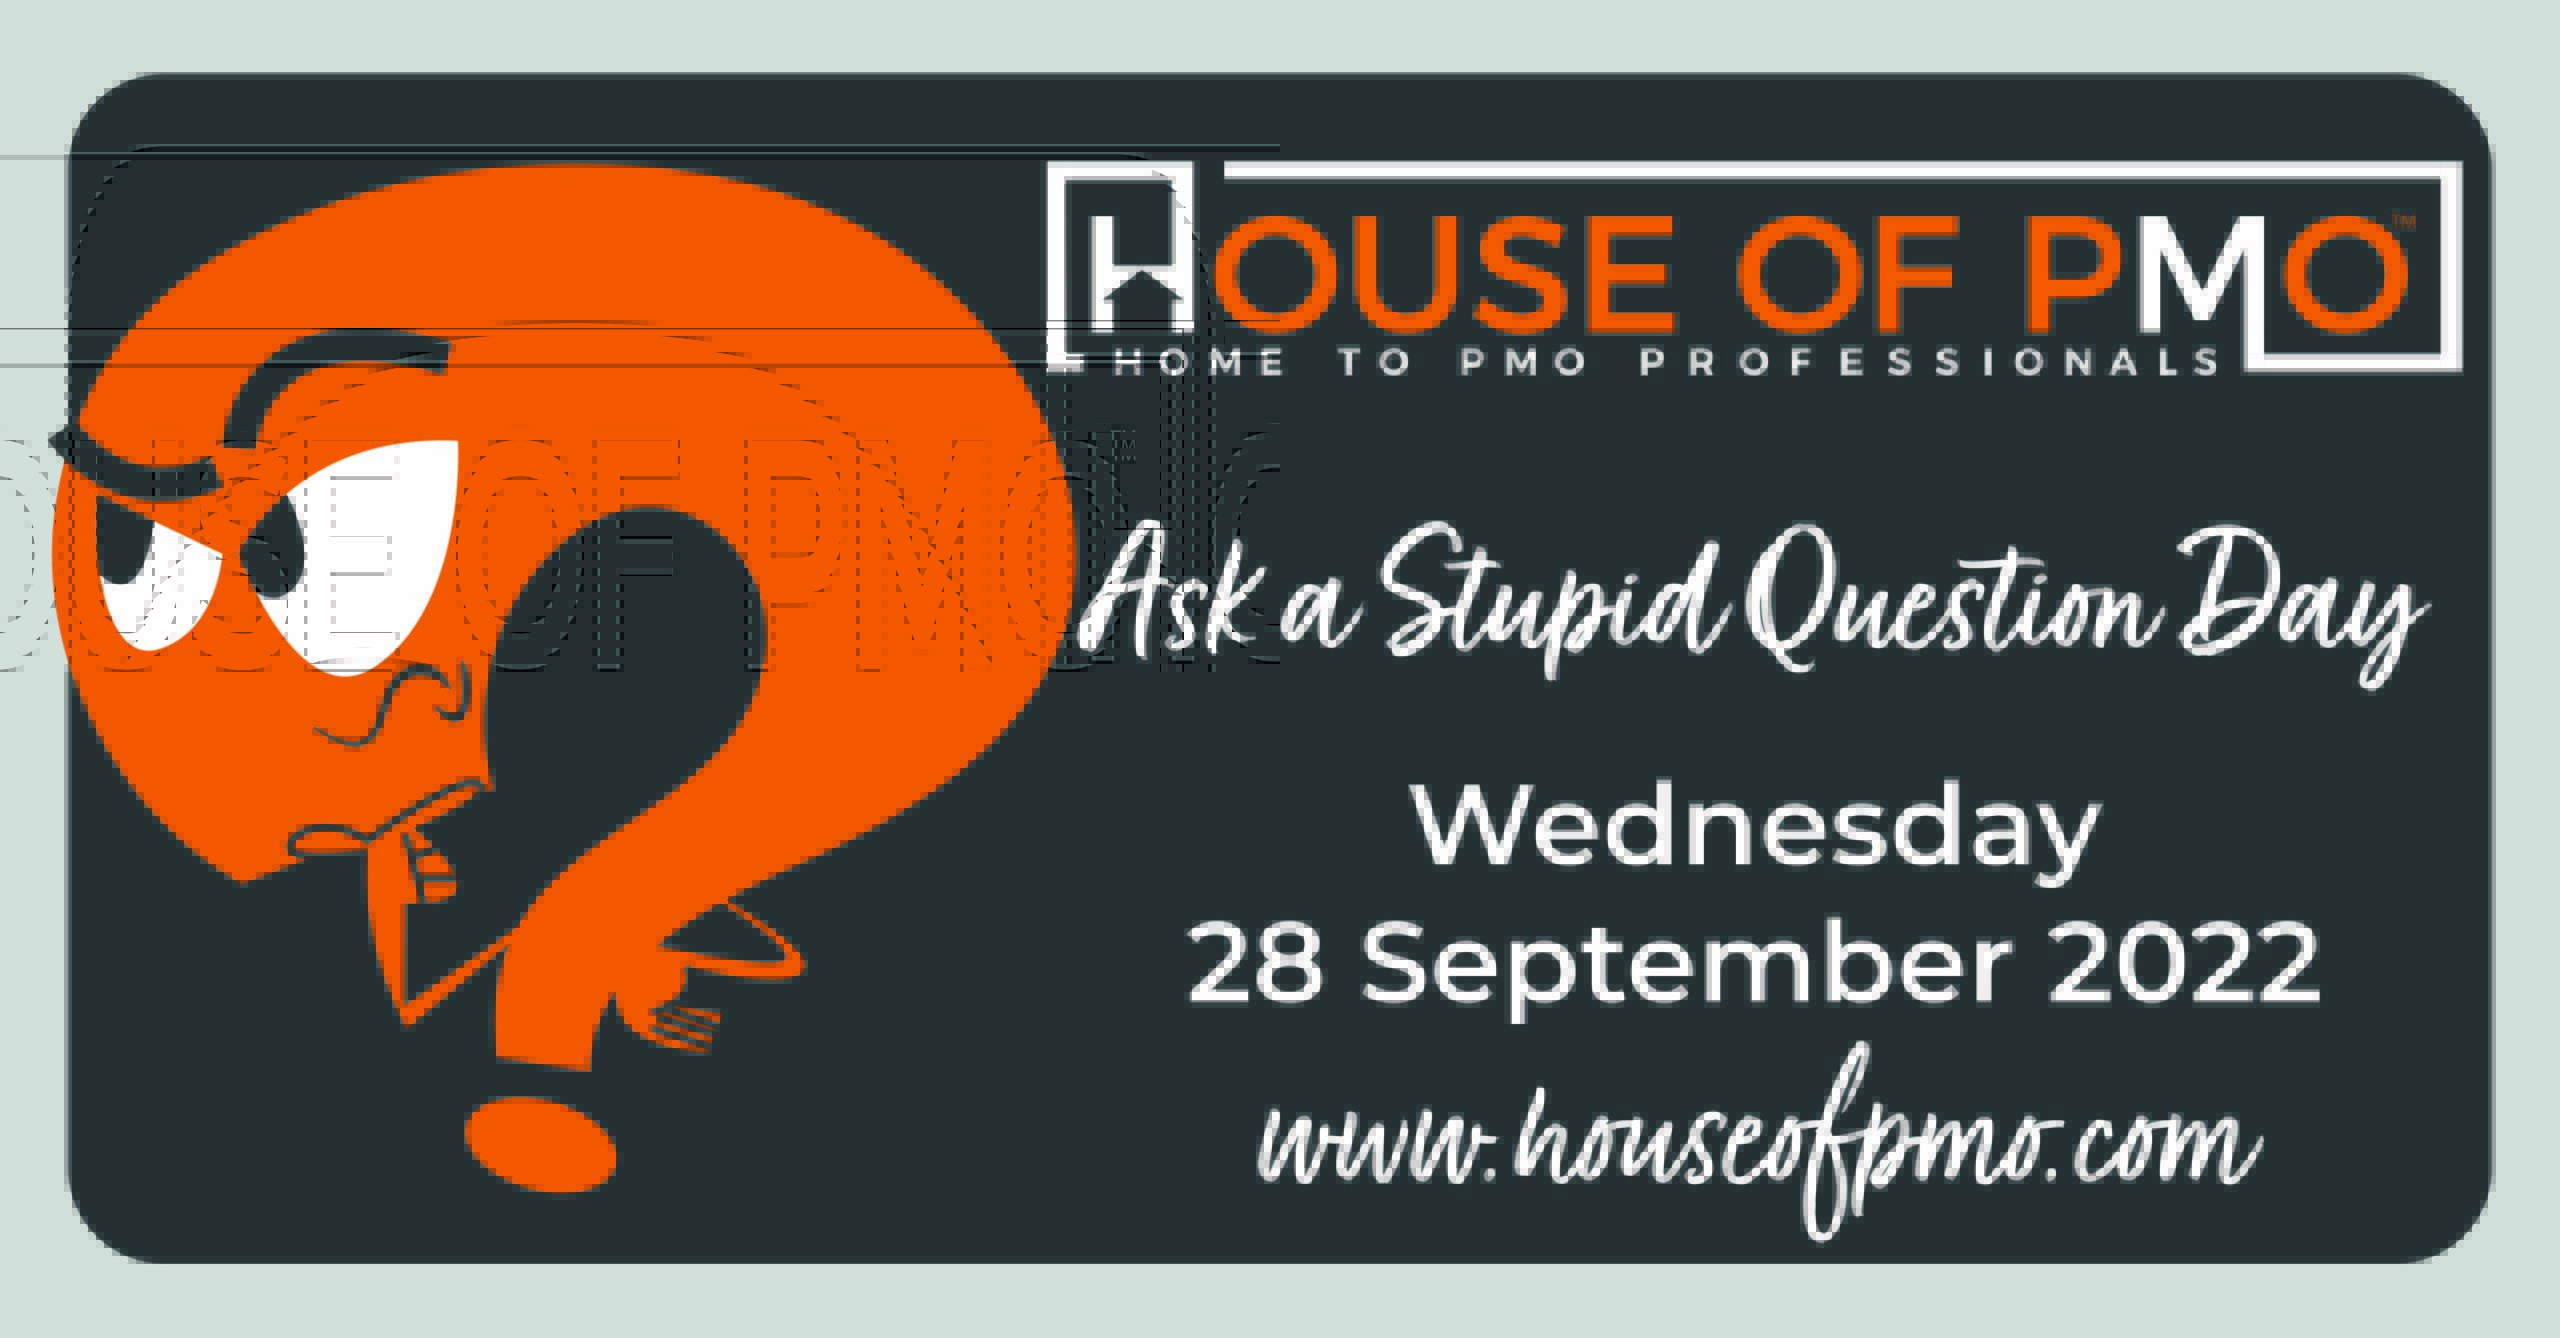 An image with a question mark character for ask a stupid question day which is taking place on the 28th of September